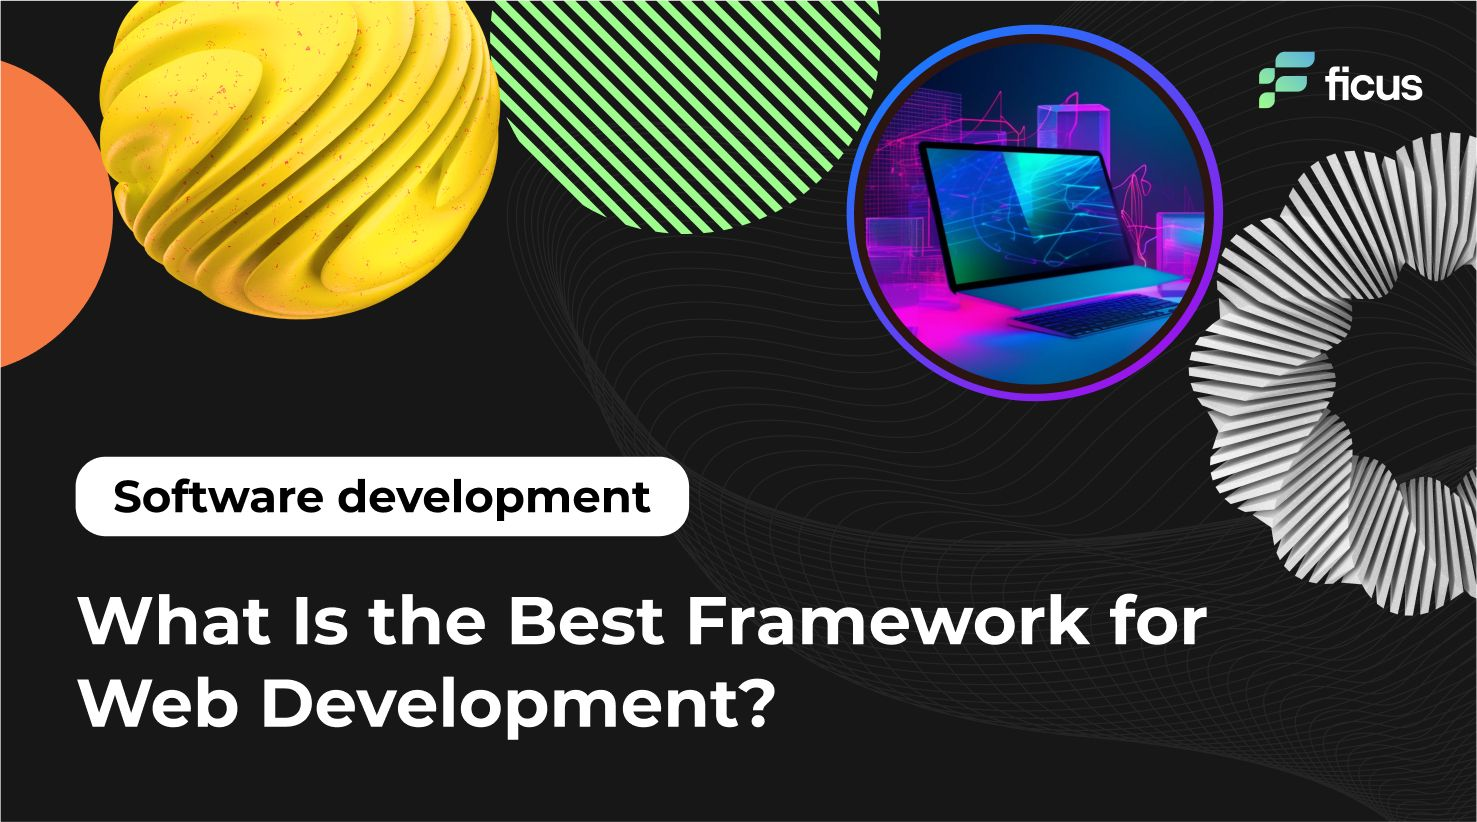 What Is the Best Framework for Web Development?